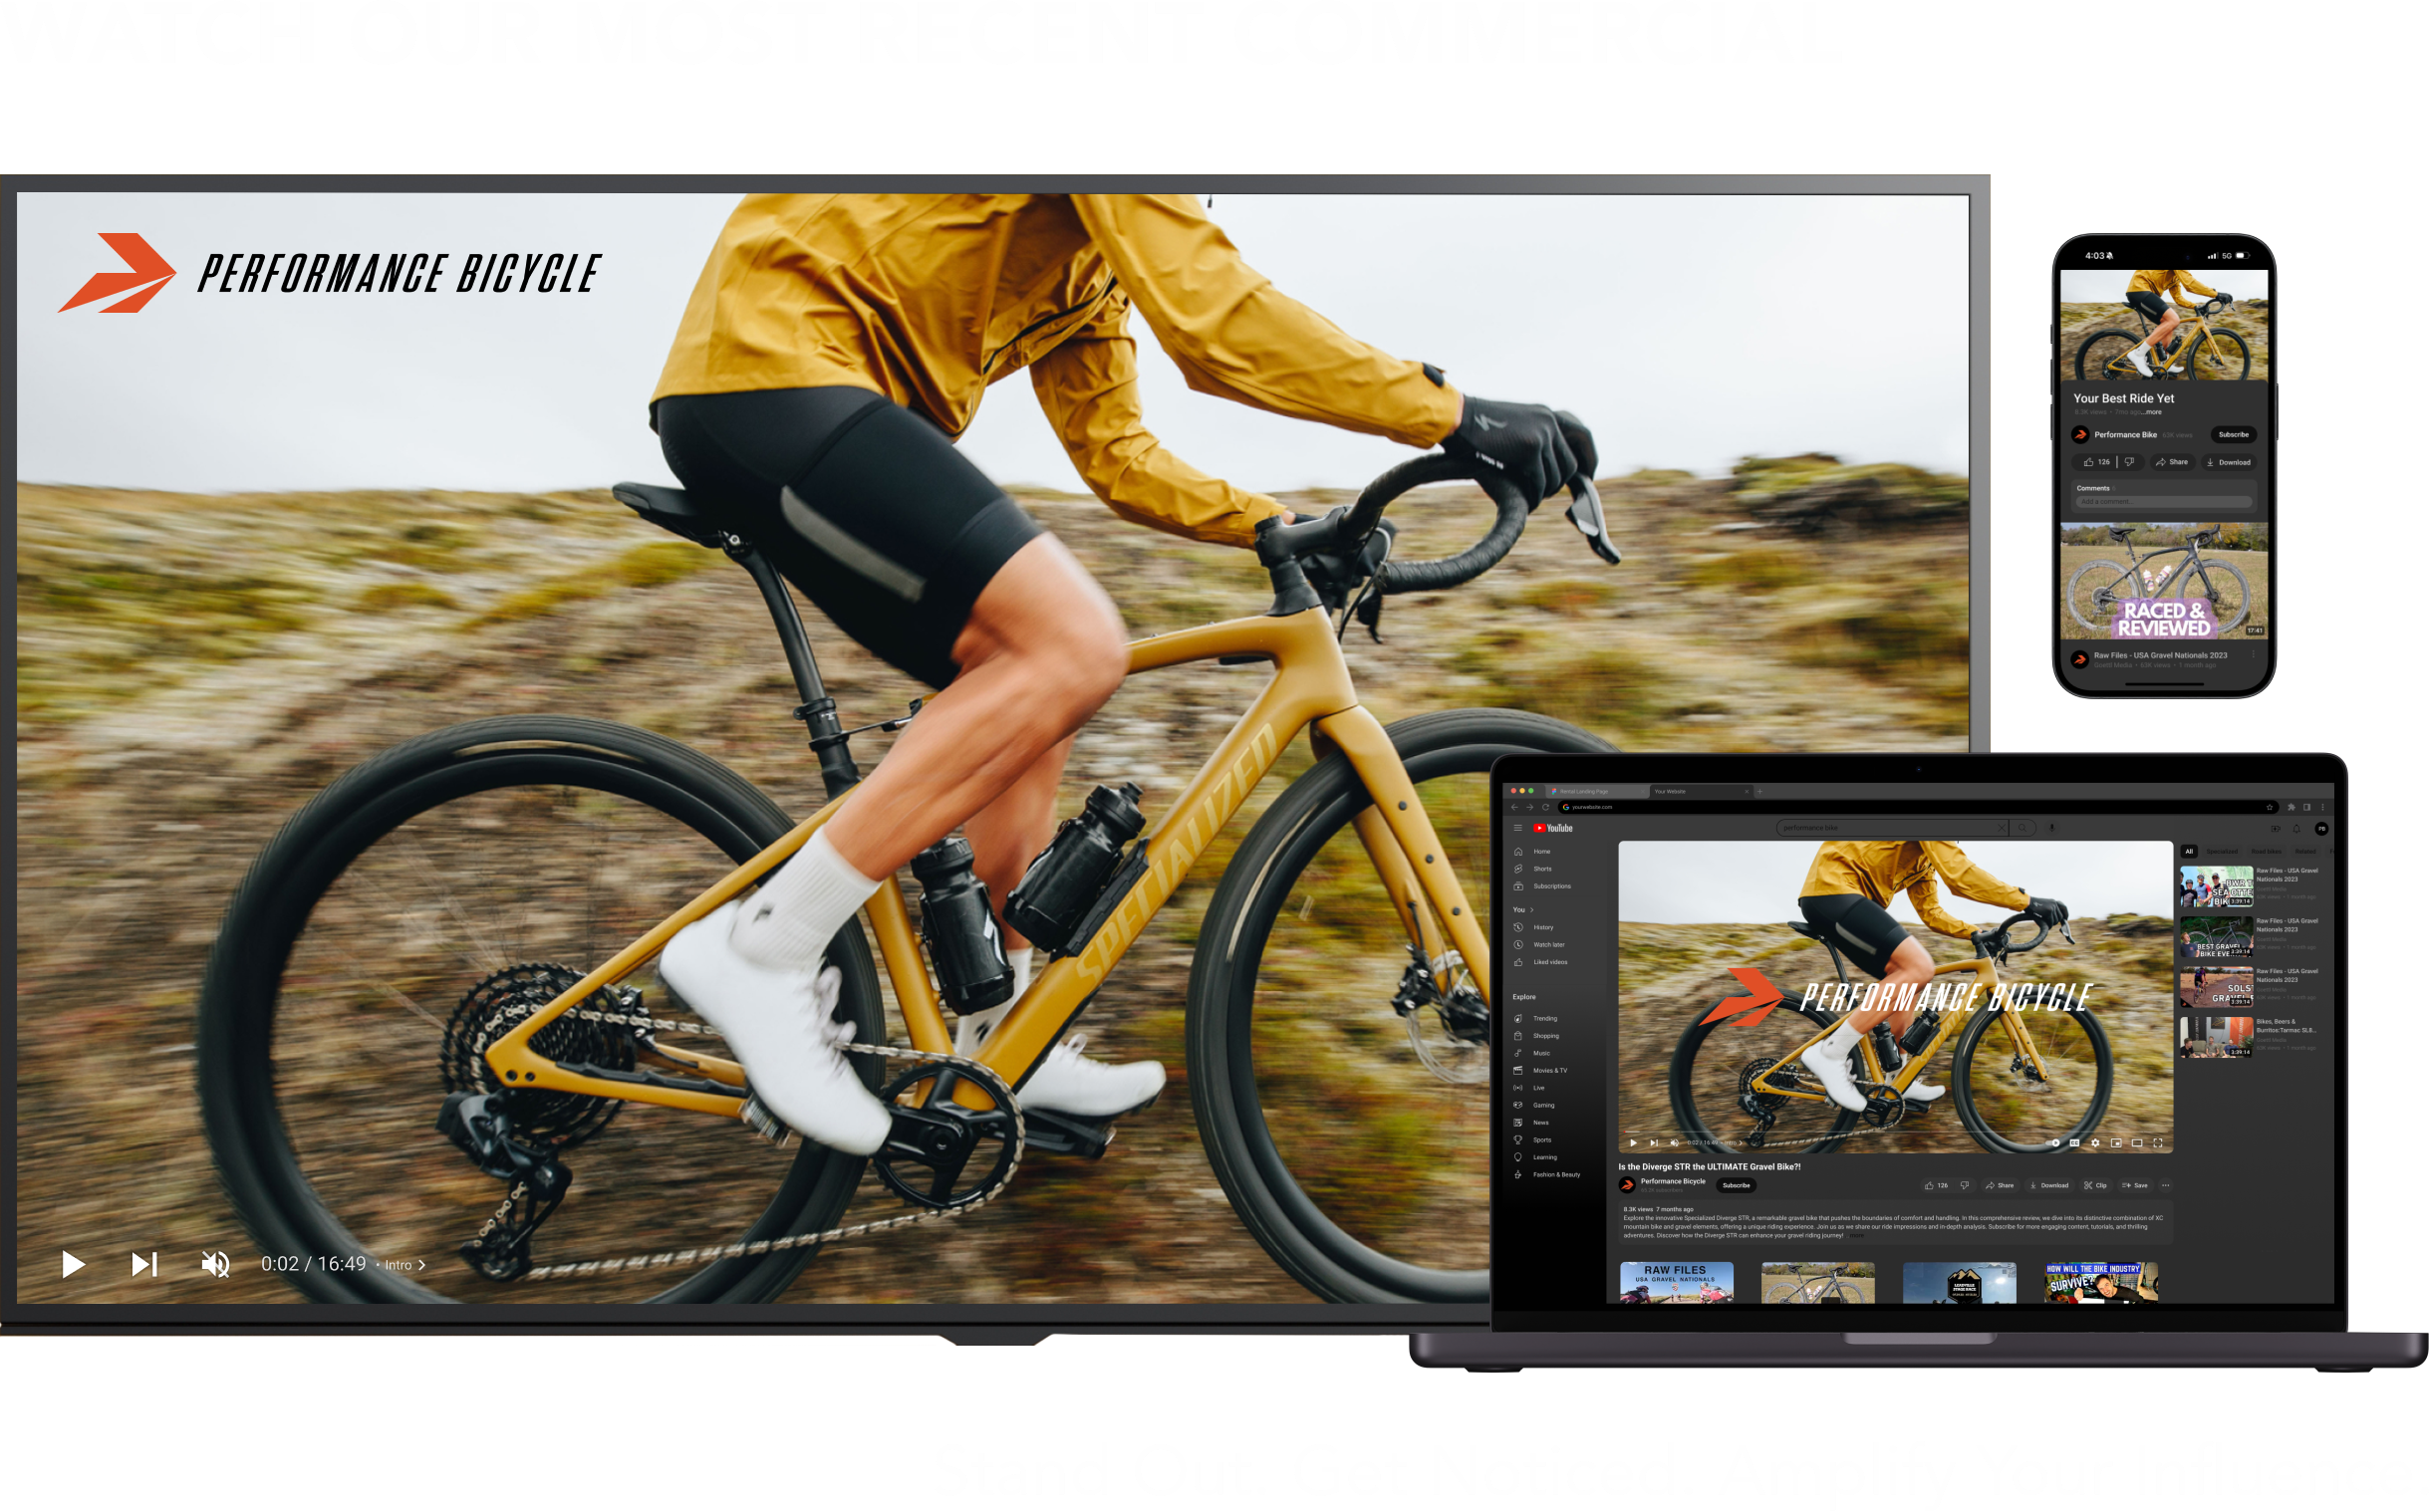 Performance Bicycle commercial displayed on a laptop, tablet, and smartphone, emphasizing the brand’s focus on digital marketing.